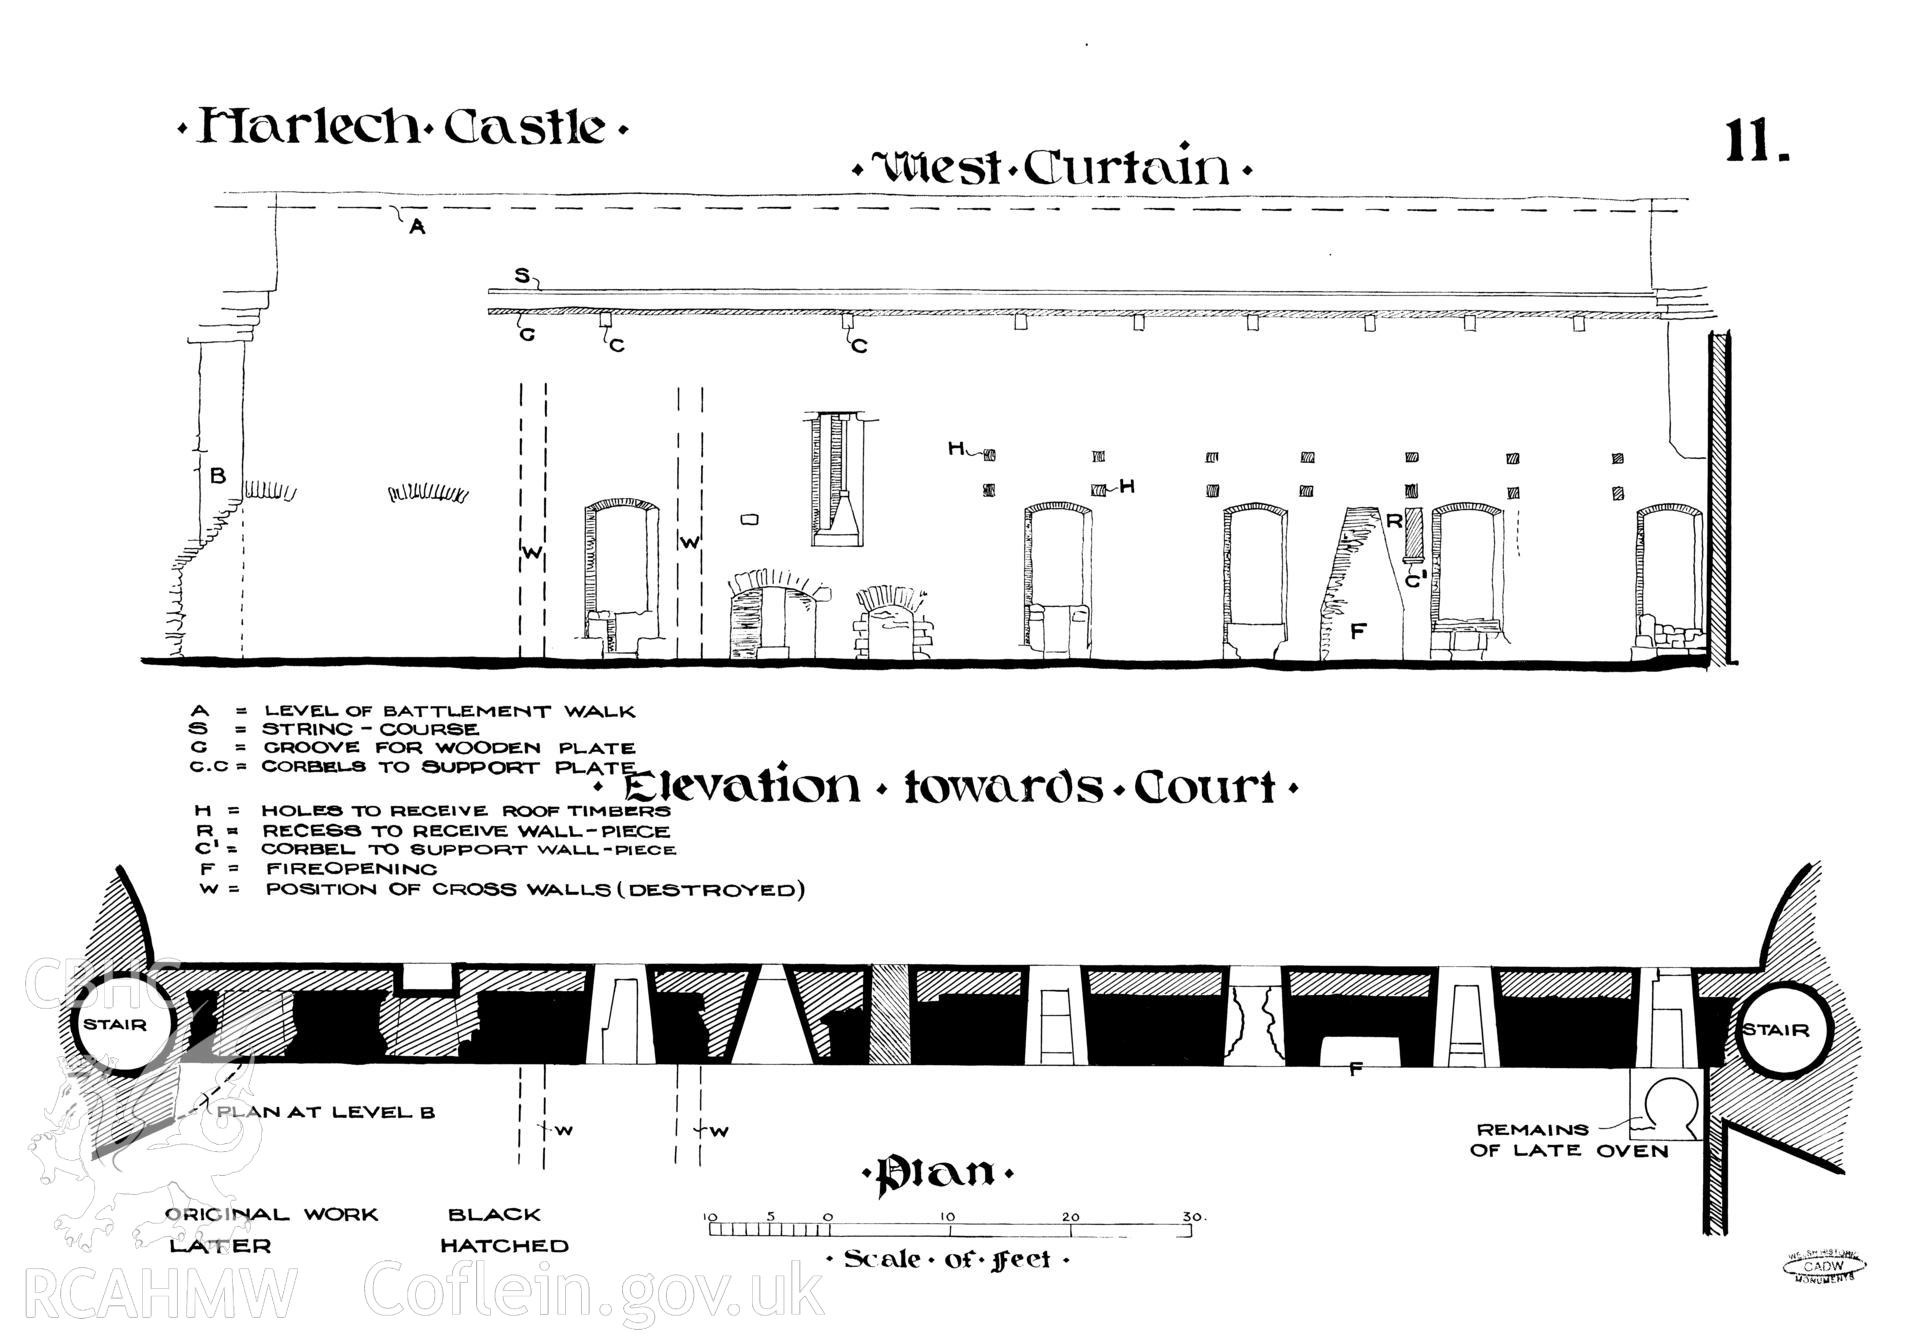 Cadw guardianship monument drawing of Harlech Castle. West Curtain Wall , elevations. Cadw Ref:86//82. Scale 1:30.